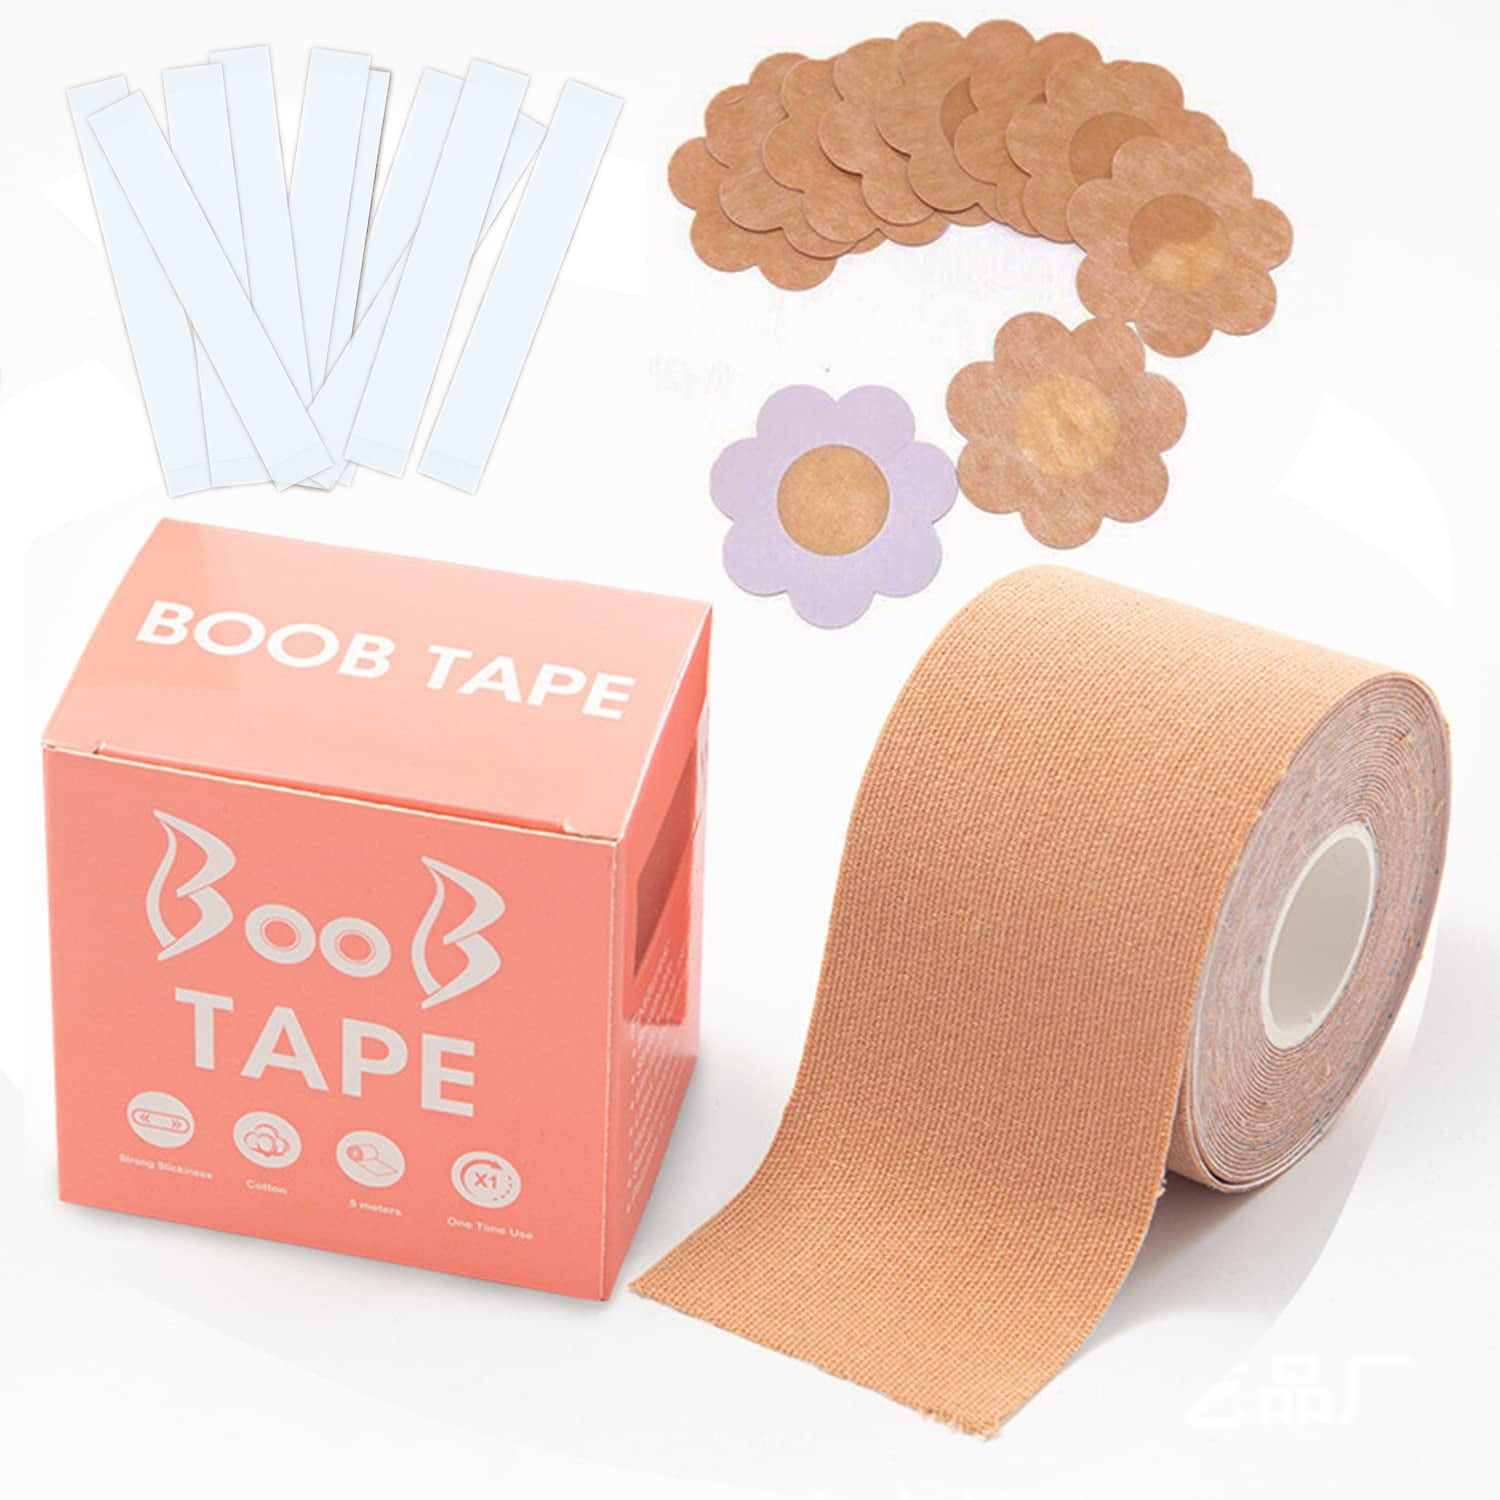 10 Best Boob Tapes To Suit Every Breast Size and Outfit Choice